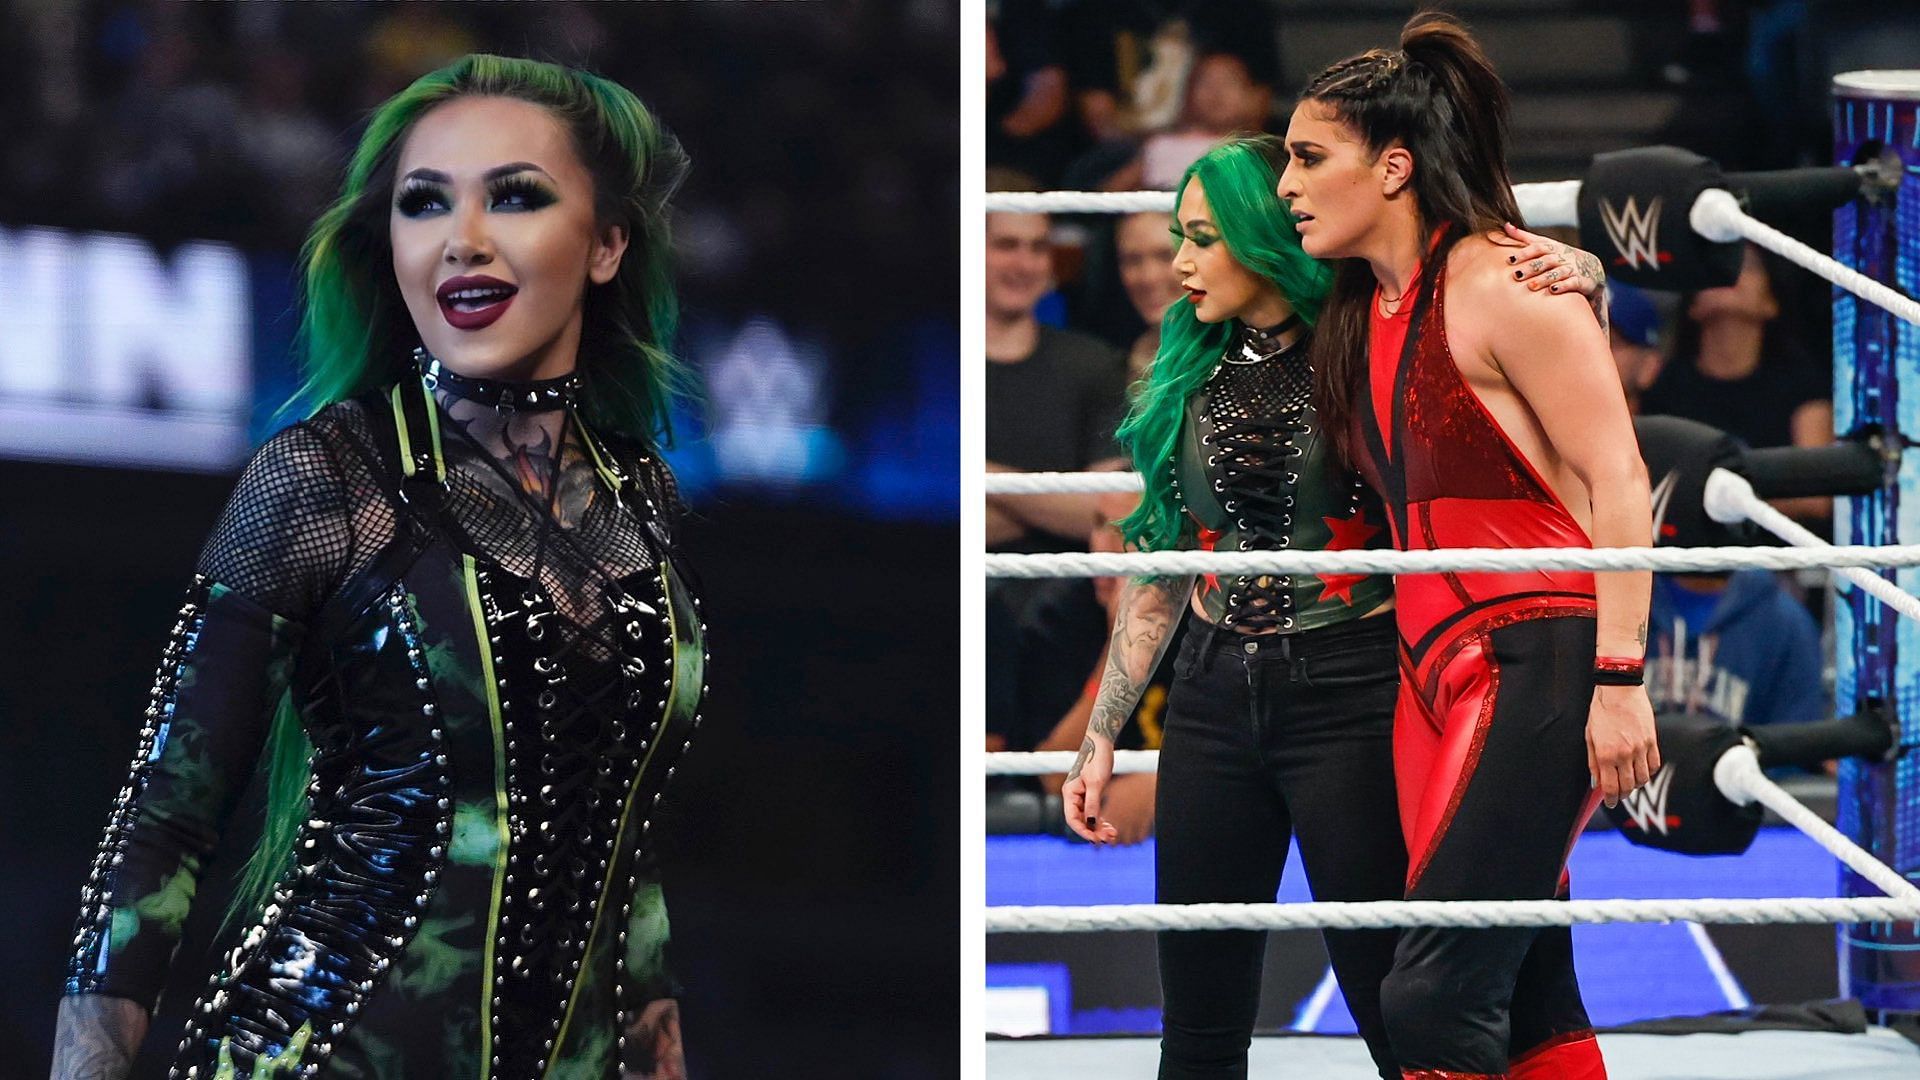 Shotzi made a surprising move on the latest WWE SmackDown